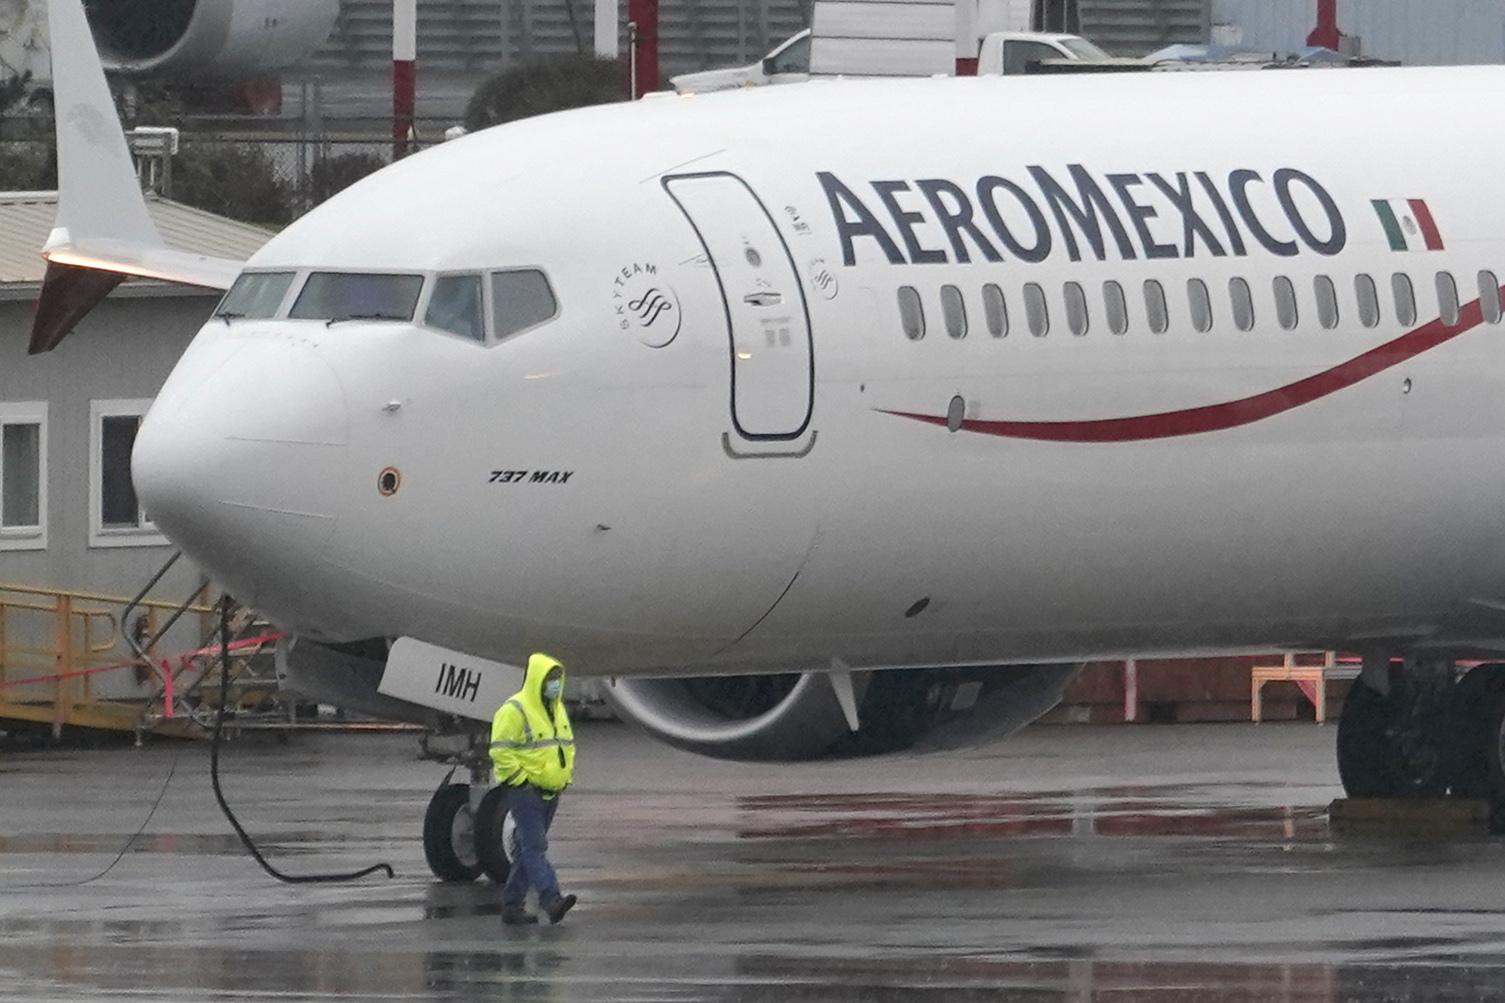 With FAA downgrade, Mexican airlines can’t add flights out of San Antonio